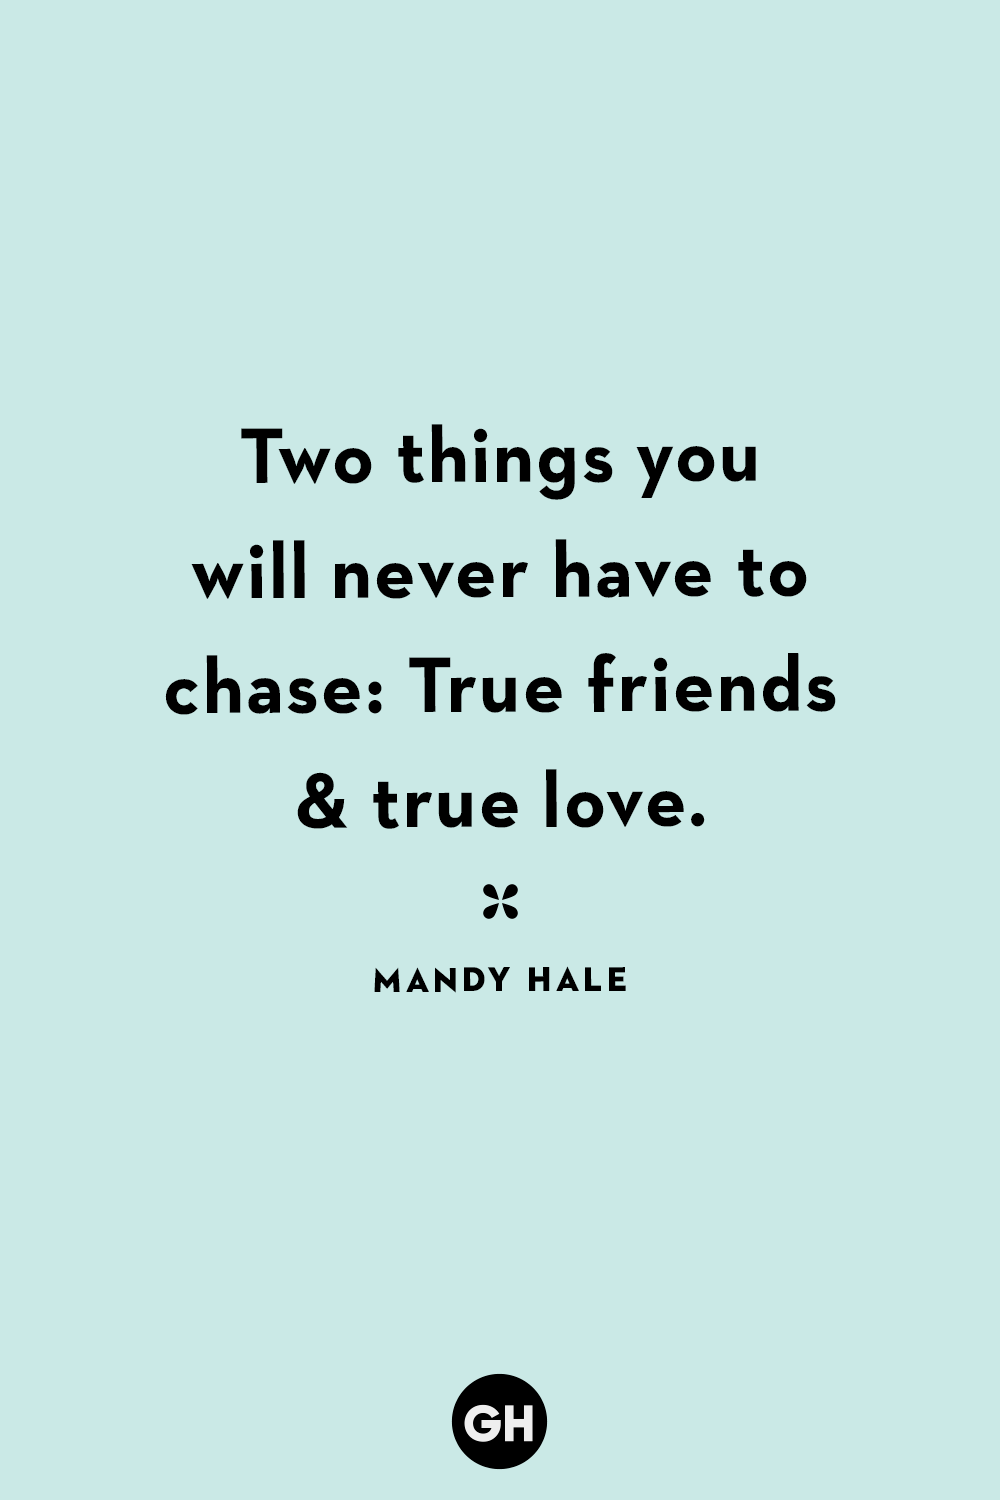 nice quotes about friendship and love